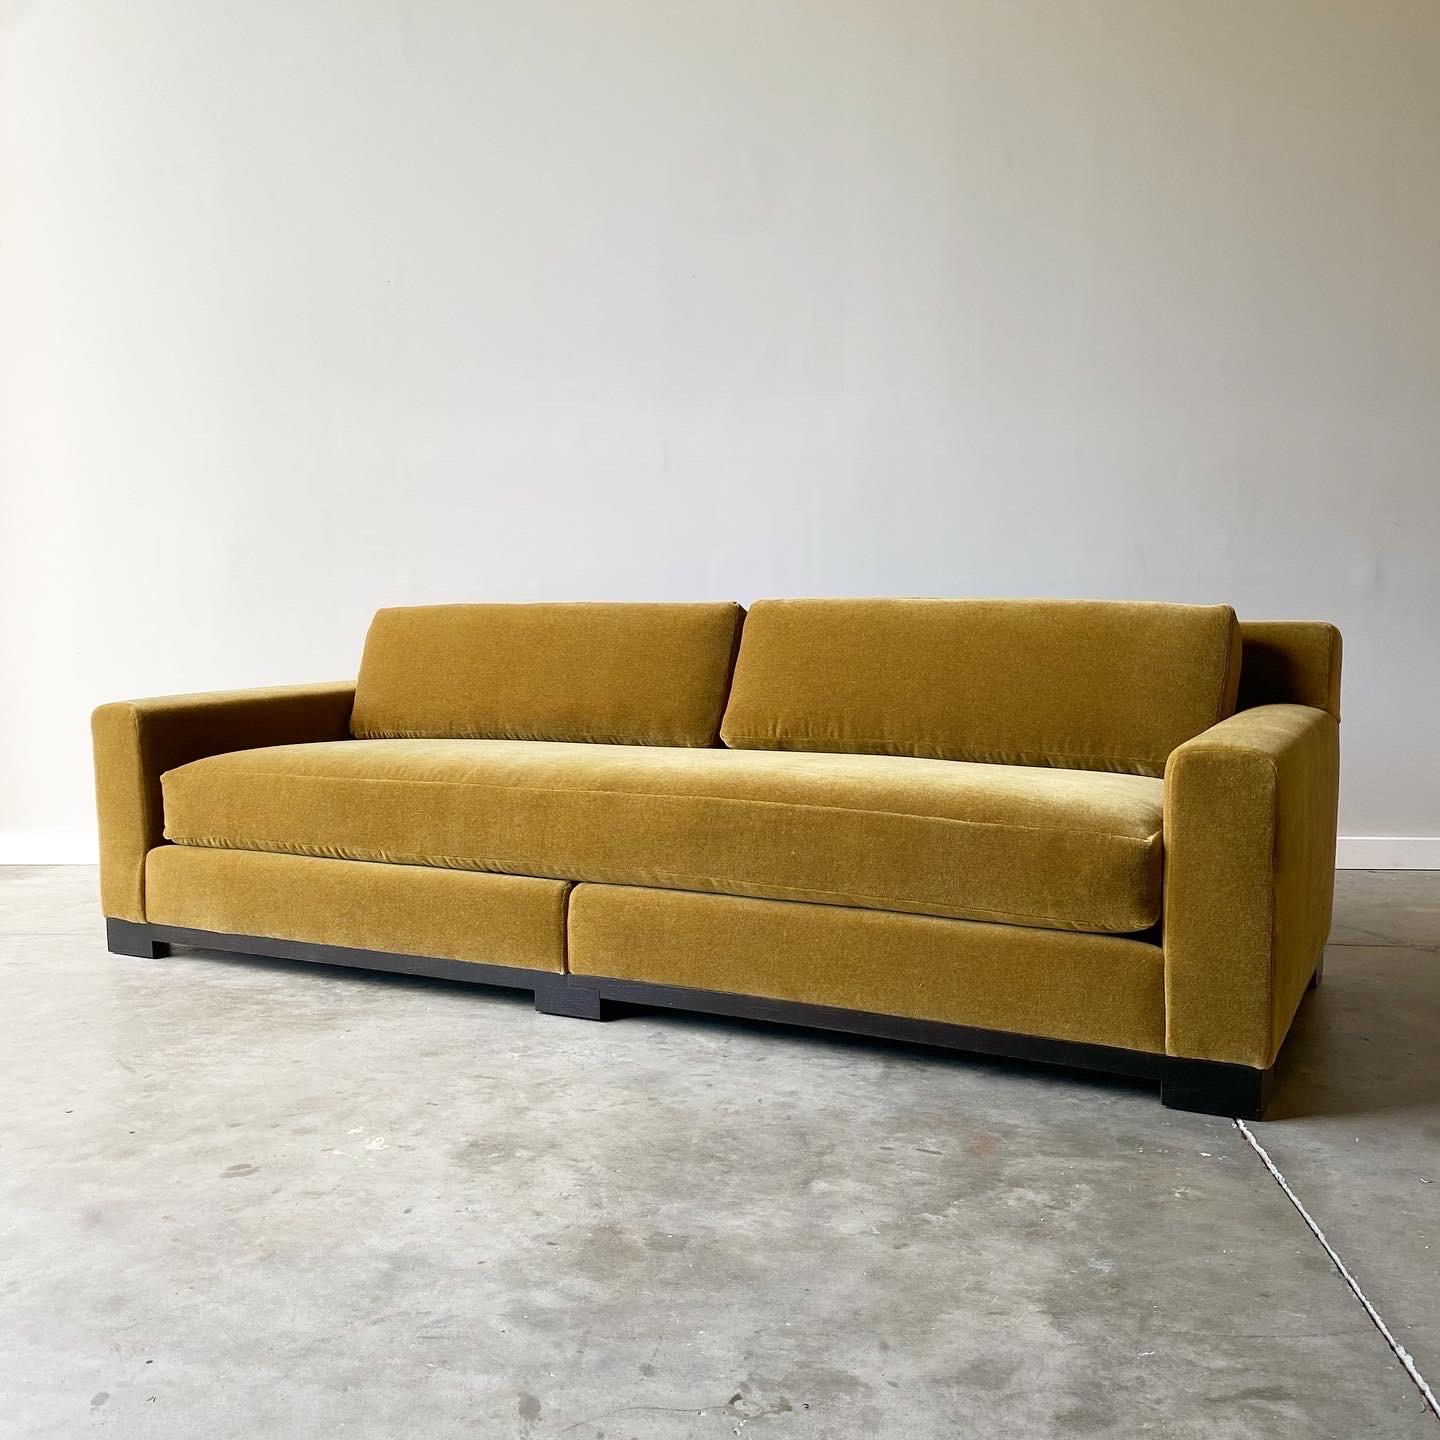 A simple and stunning design by Christian Liaigre produced by Holly Hunt.  This two piece sofa is very deep and comfortable and is newly upholstered in a luxurious mohair.

measures 101” long, 42” deep, 30” high

19” seat height and 25” seat depth